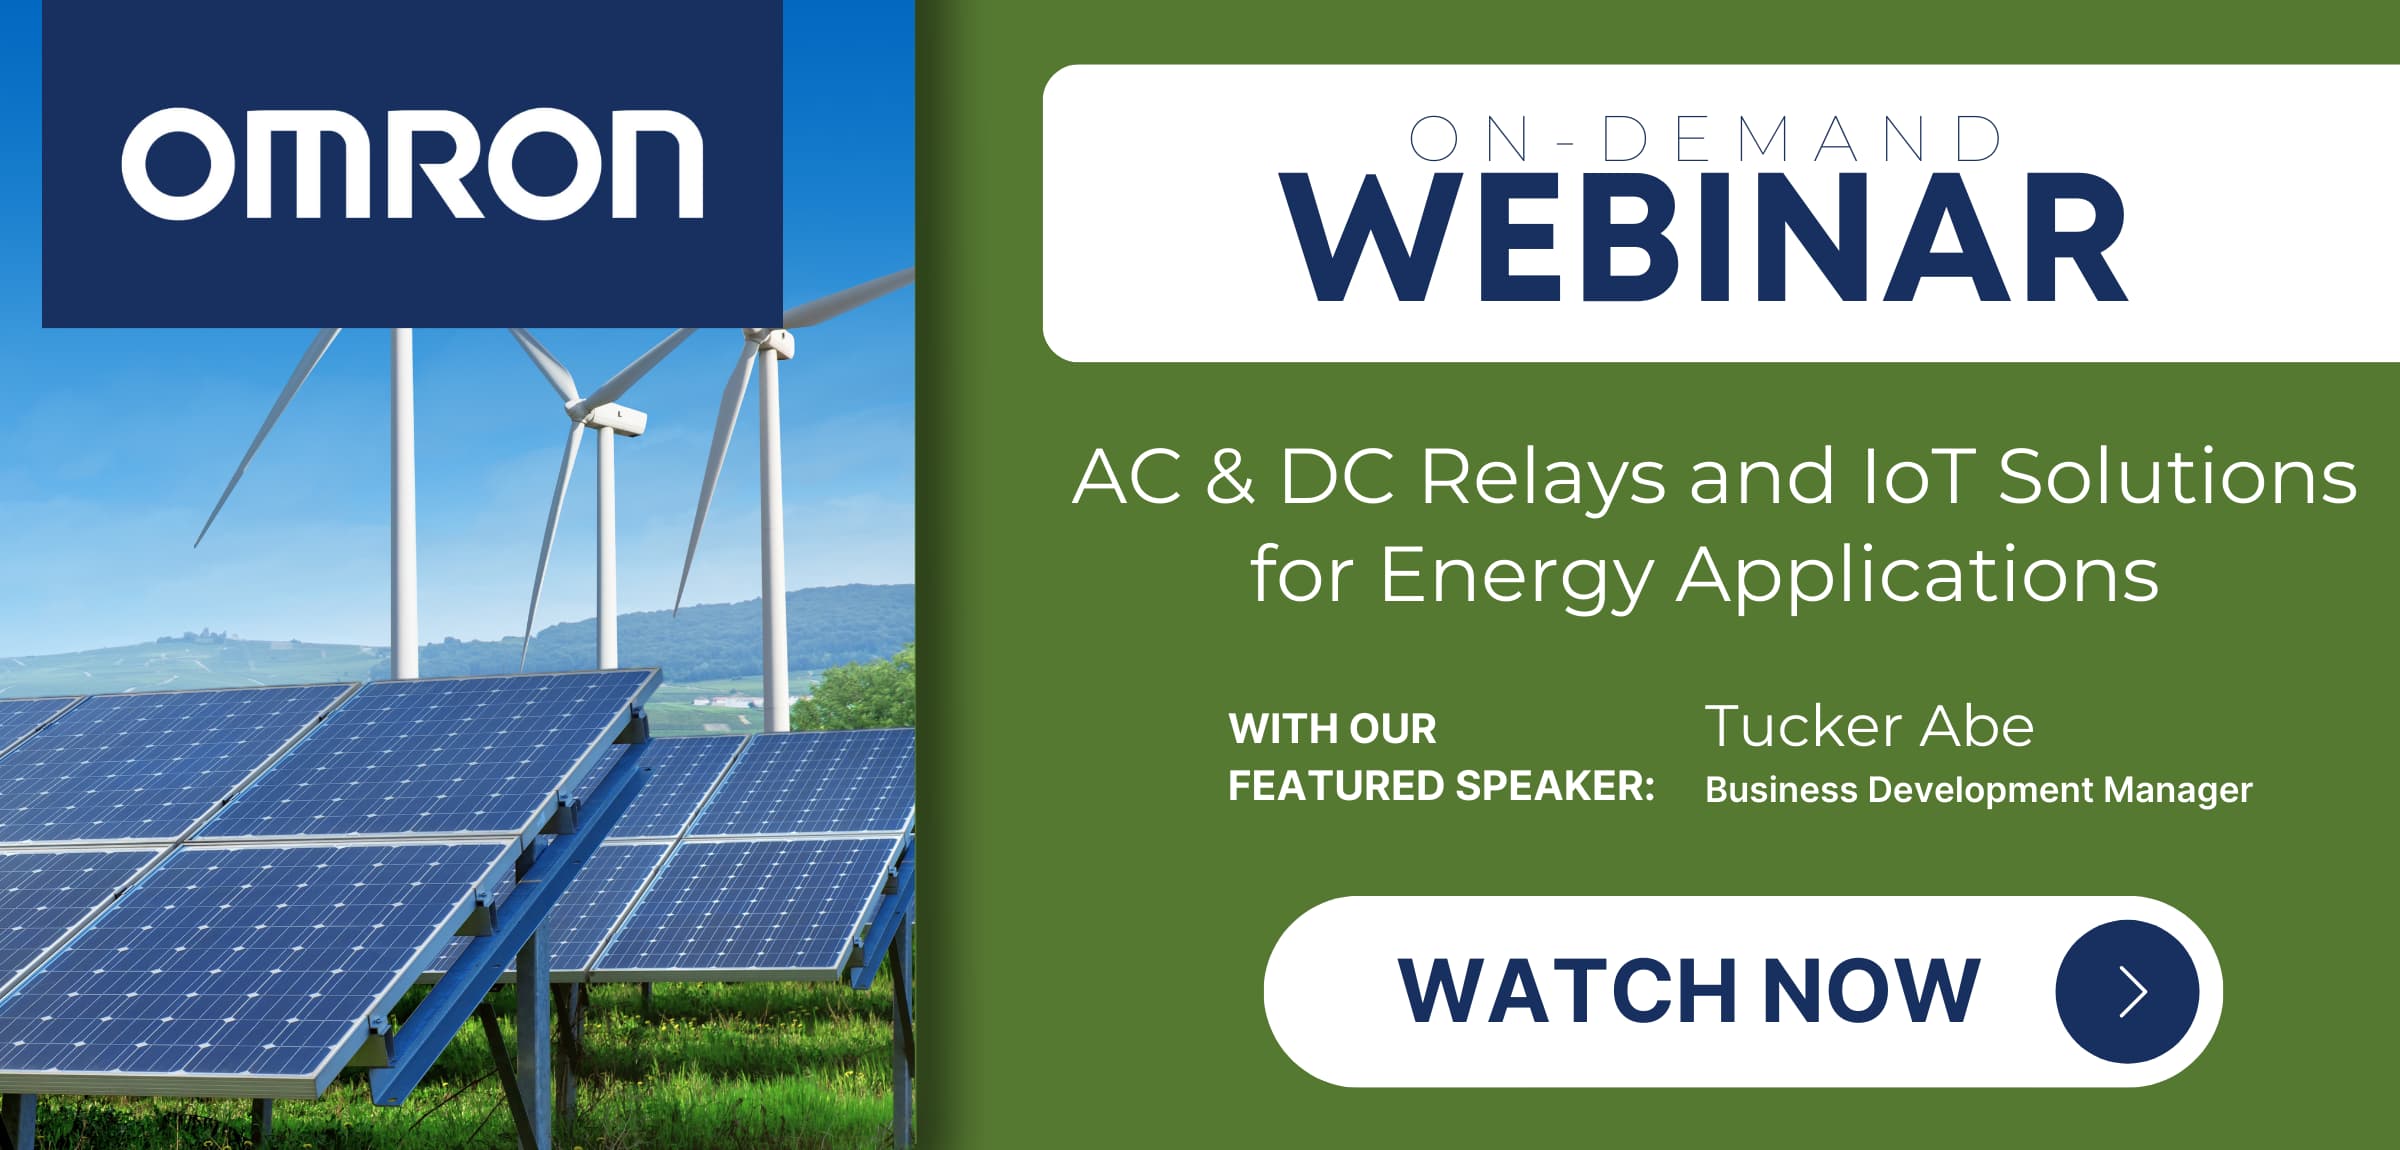 OMRON ON-DEMAND WEBINAR AC & DC Relays and IoT Solutions for Energy Applications WITH OUR FEATURED SPEAKER: Tucker Abe Business Development Manager WATCH NOW→